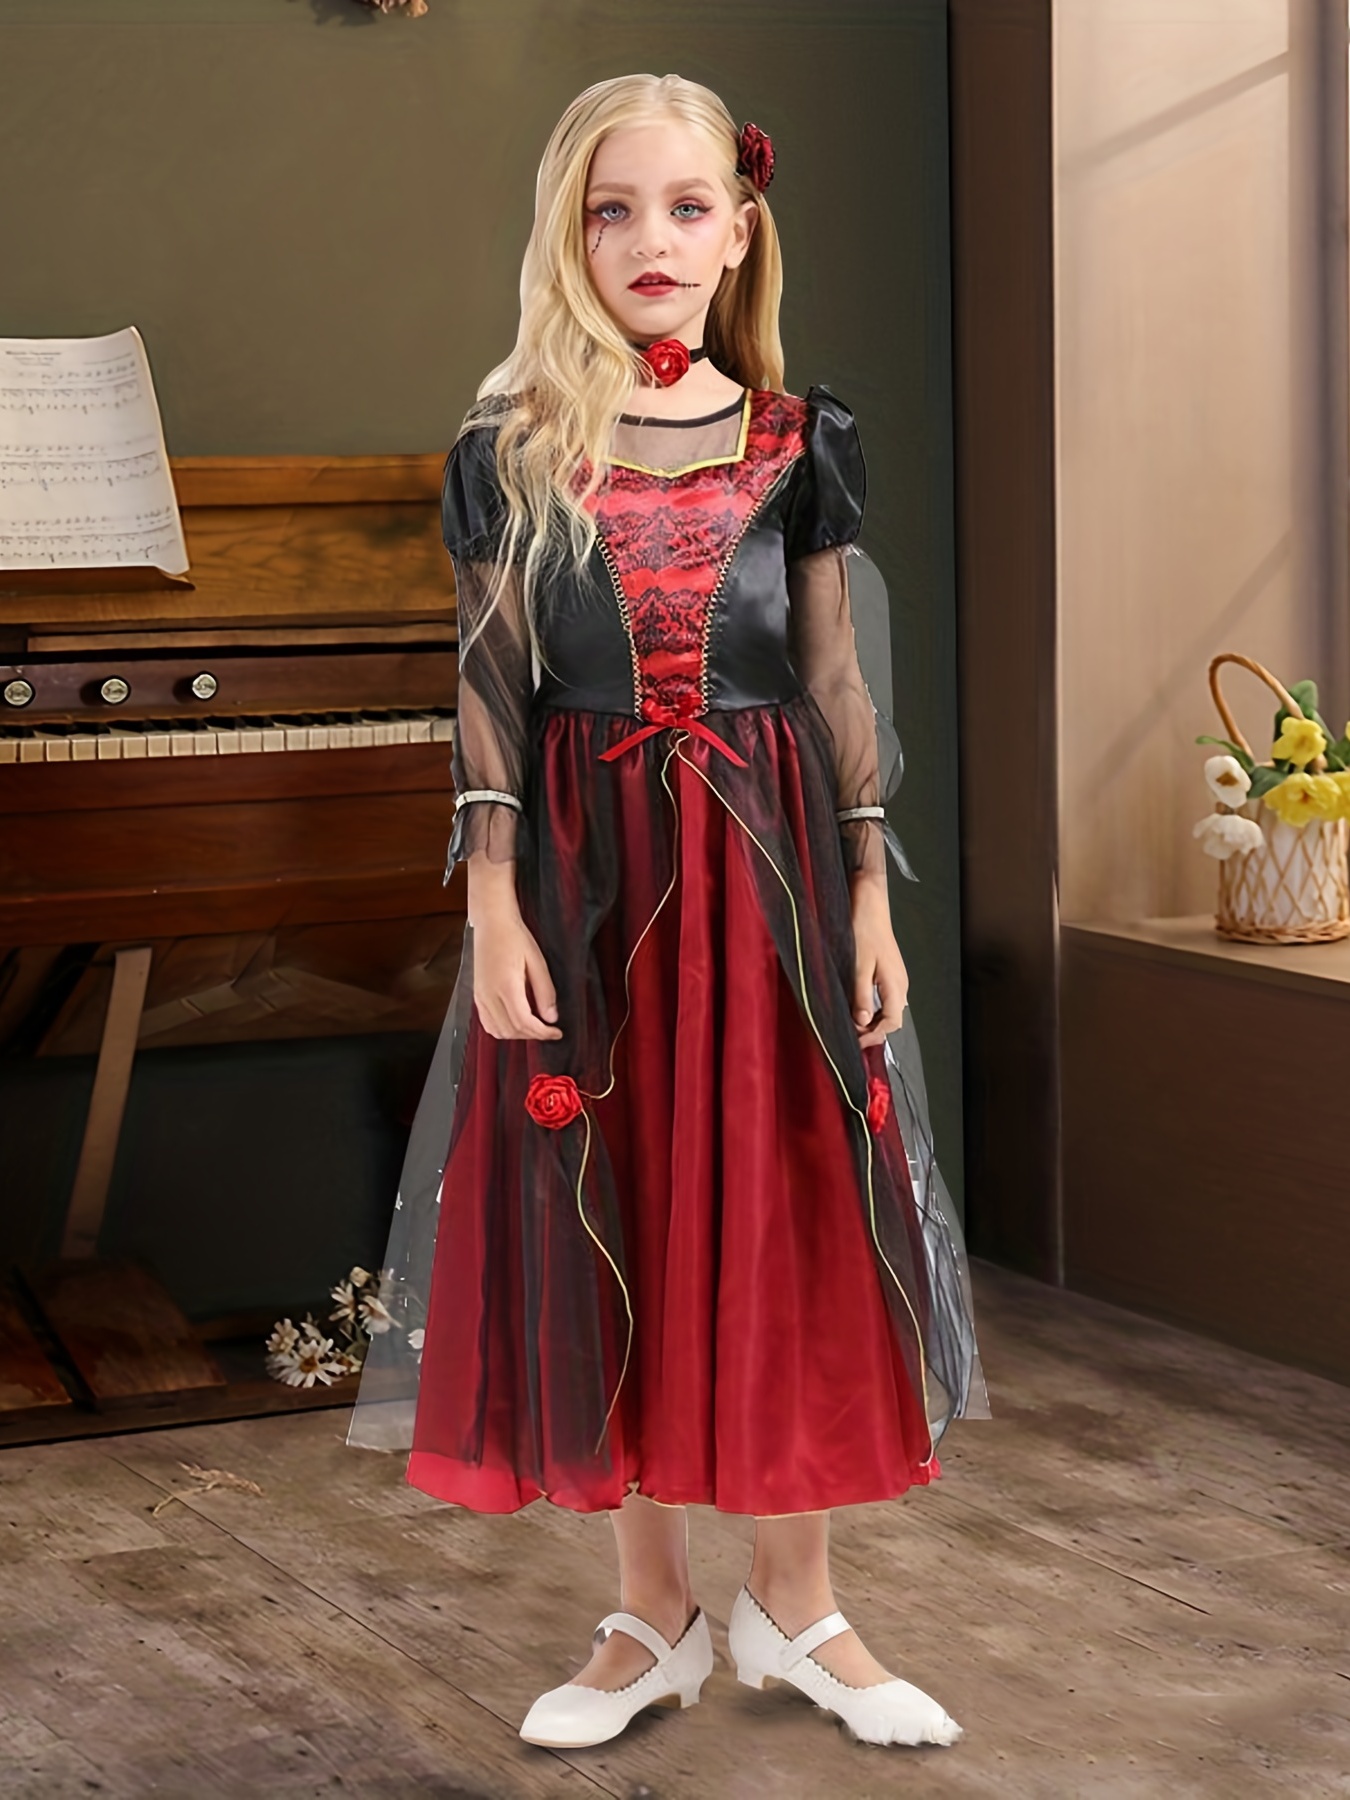 Girls Vampire Costume, Princess Masquerade Party for Halloween Party